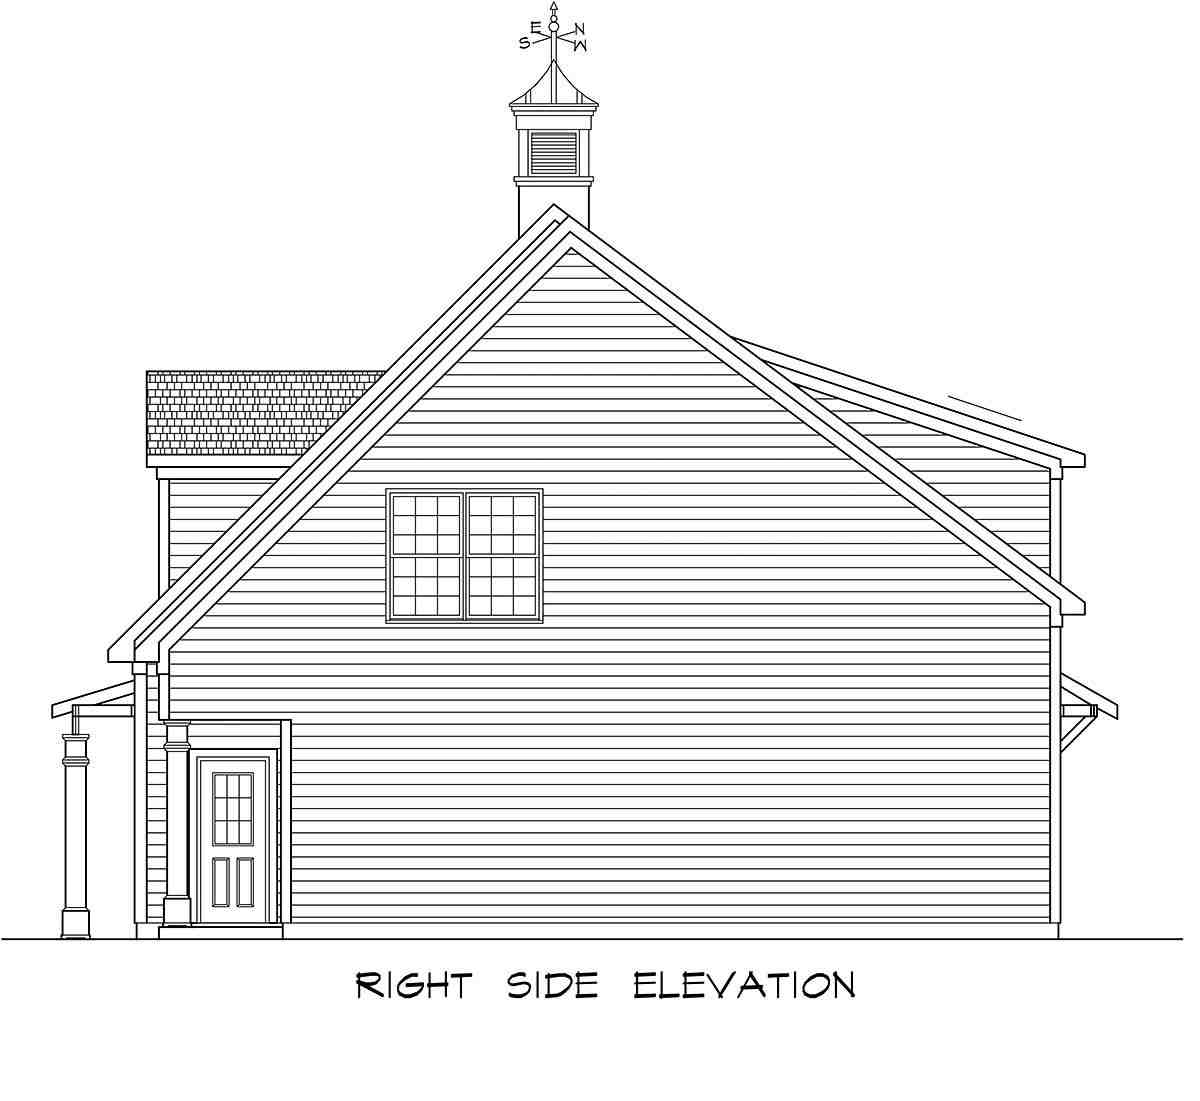 Traditional Garage-Living Plan 76707 with 2 Bed, 1 Bath, 3 Car Garage Picture 1